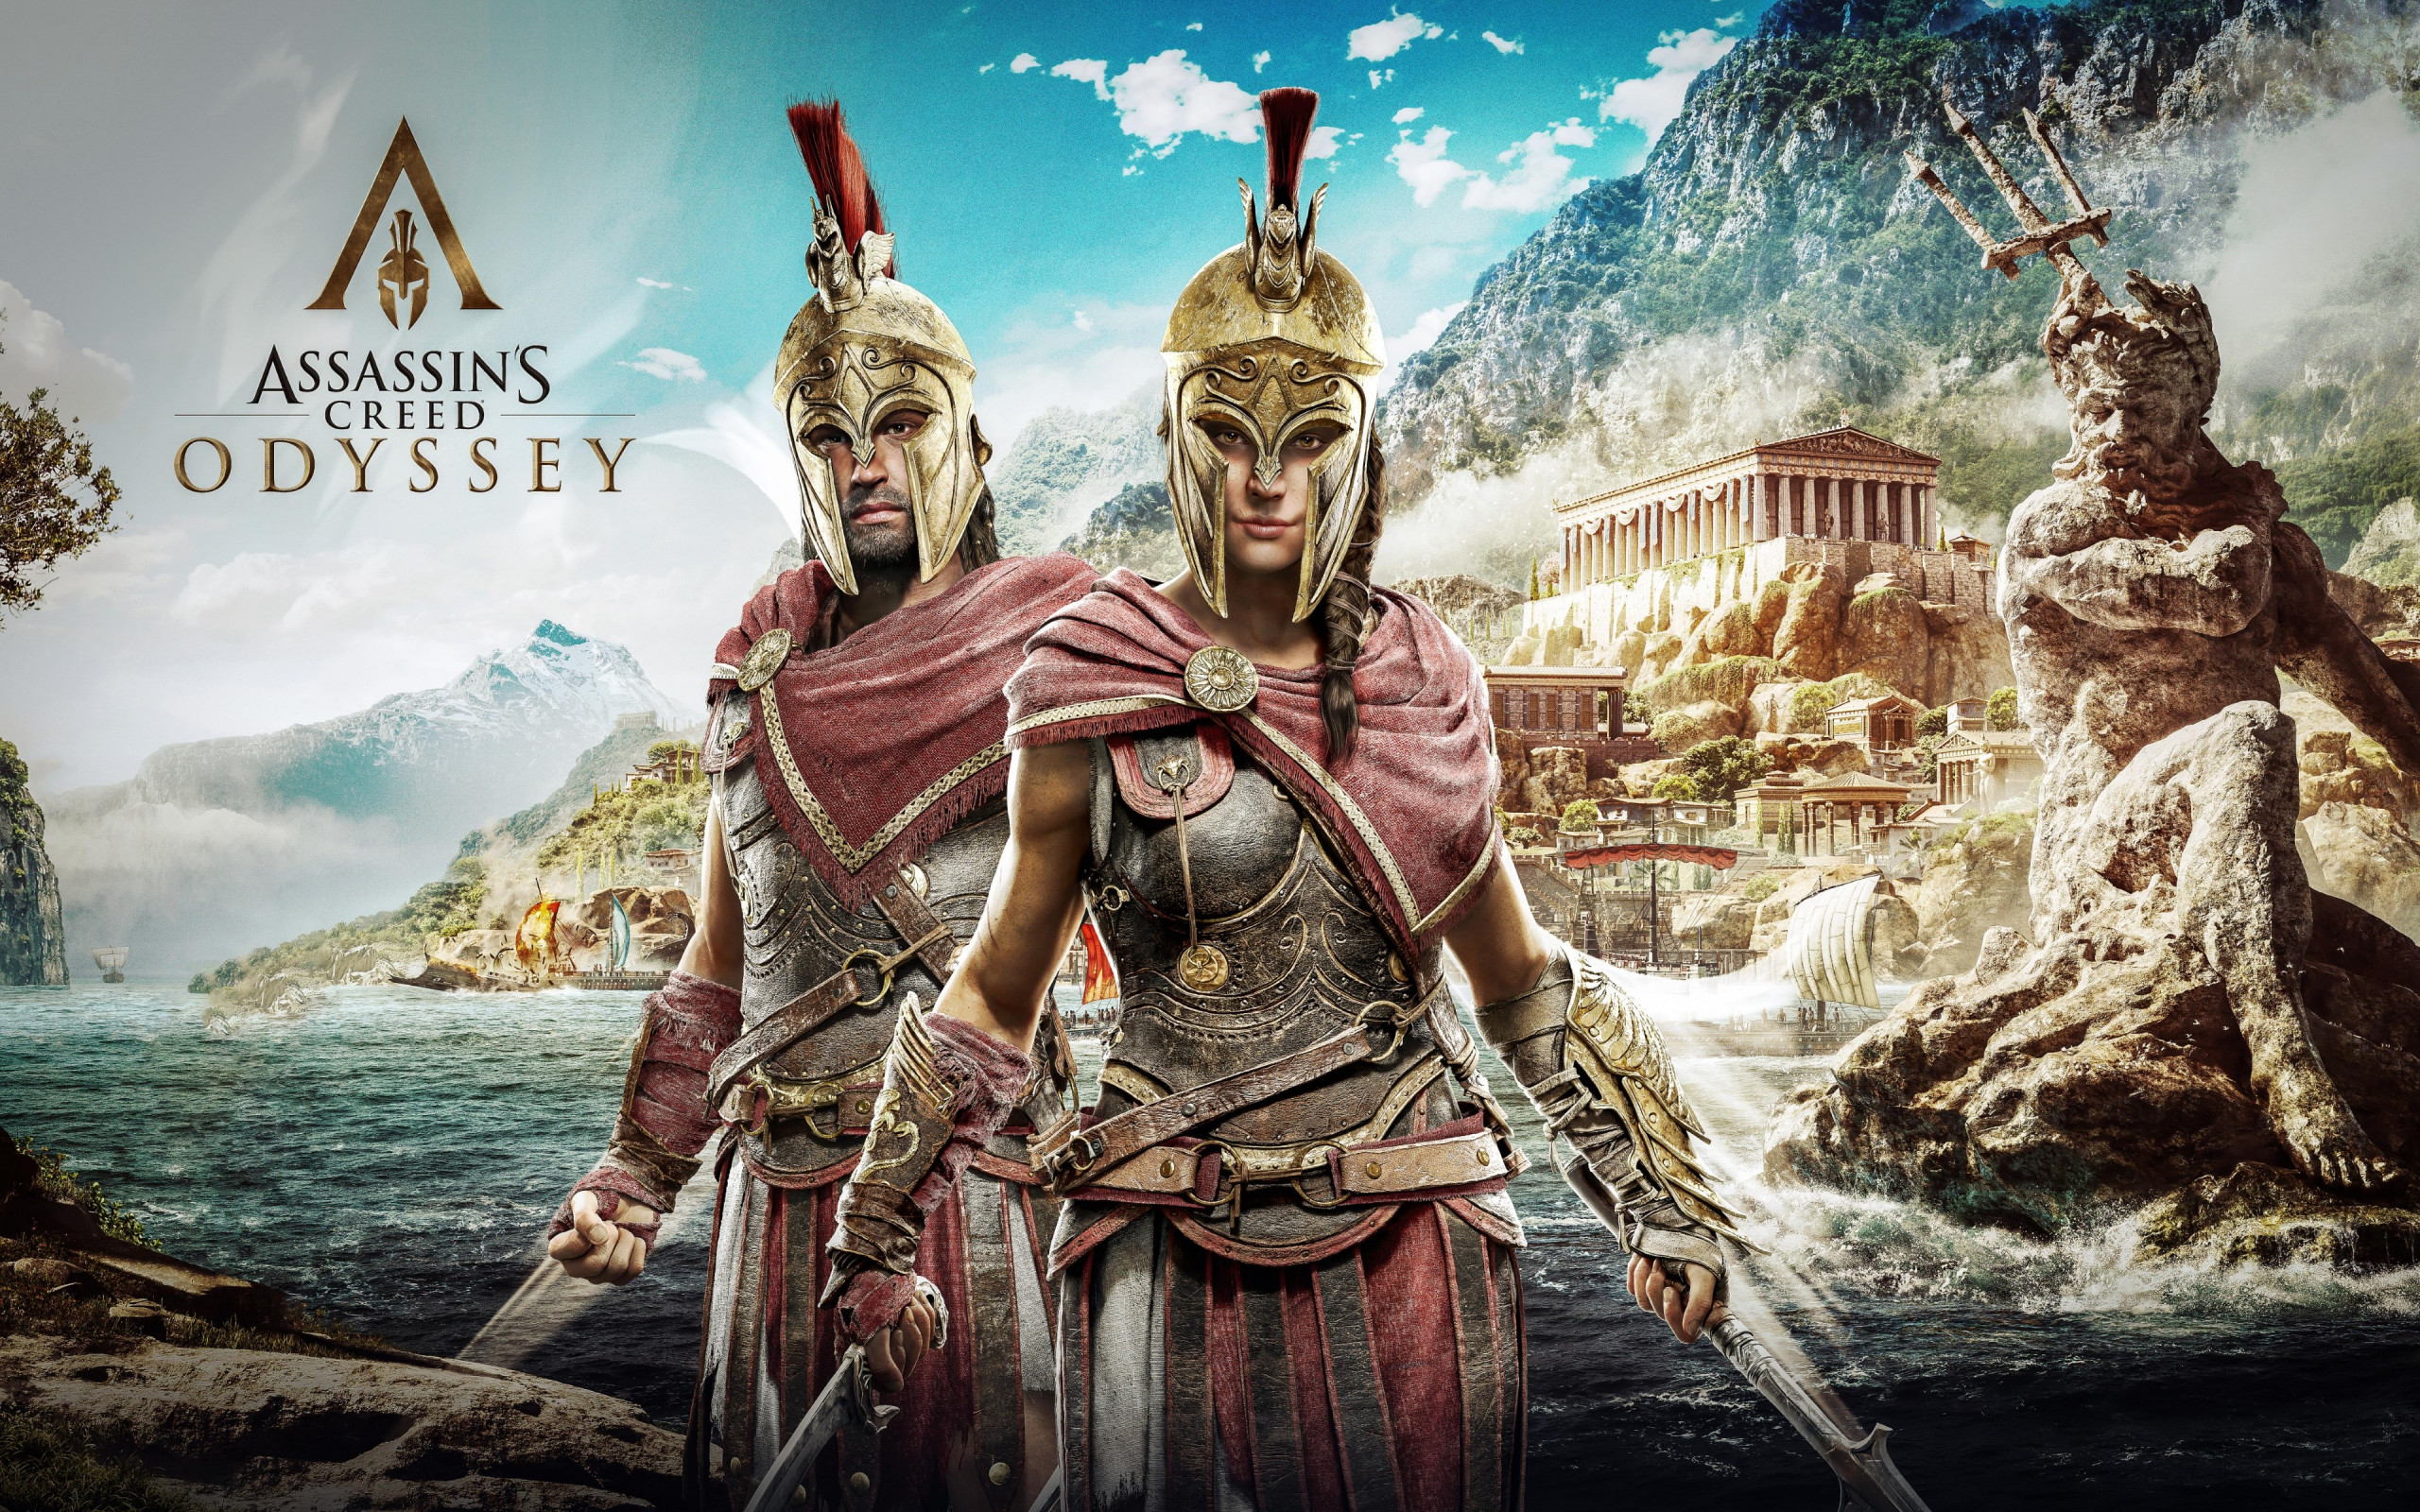 Assassin S Creed Odyssey Poster Wallpaper - Assassin's Creed Odyssey Alexis Kassandra - HD Wallpaper 